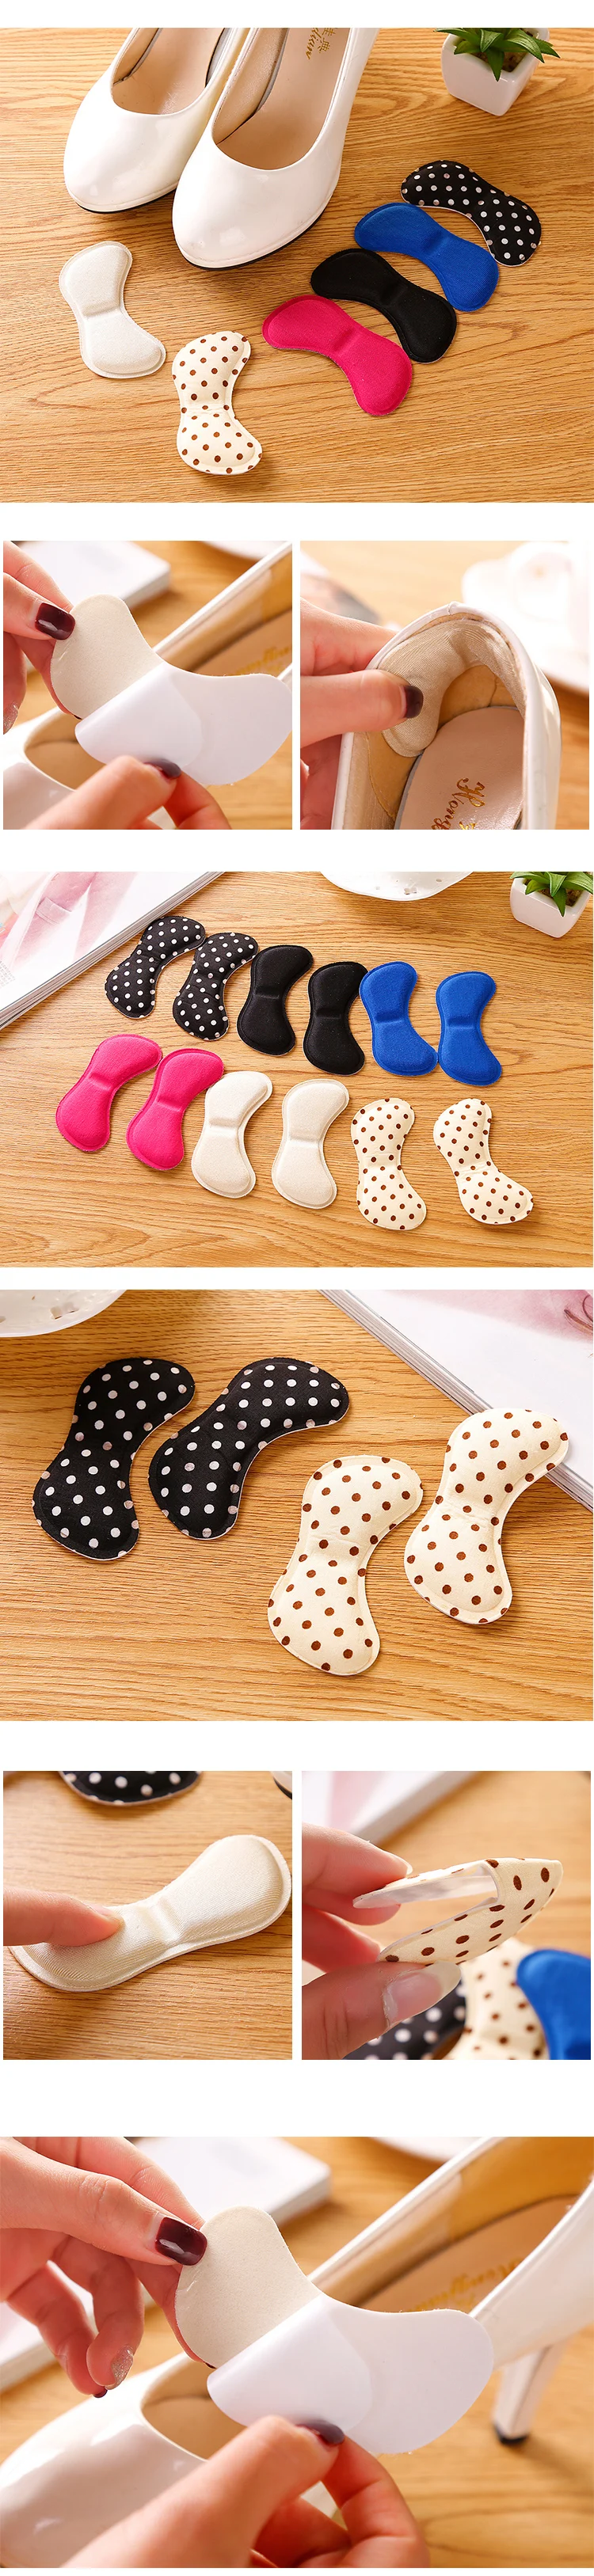 Soft Foam Half Soles Insoles Shoes Back Inserts Heel Liner Cushion Protector Foot Care Shoe Pads Grips Stickers (8)